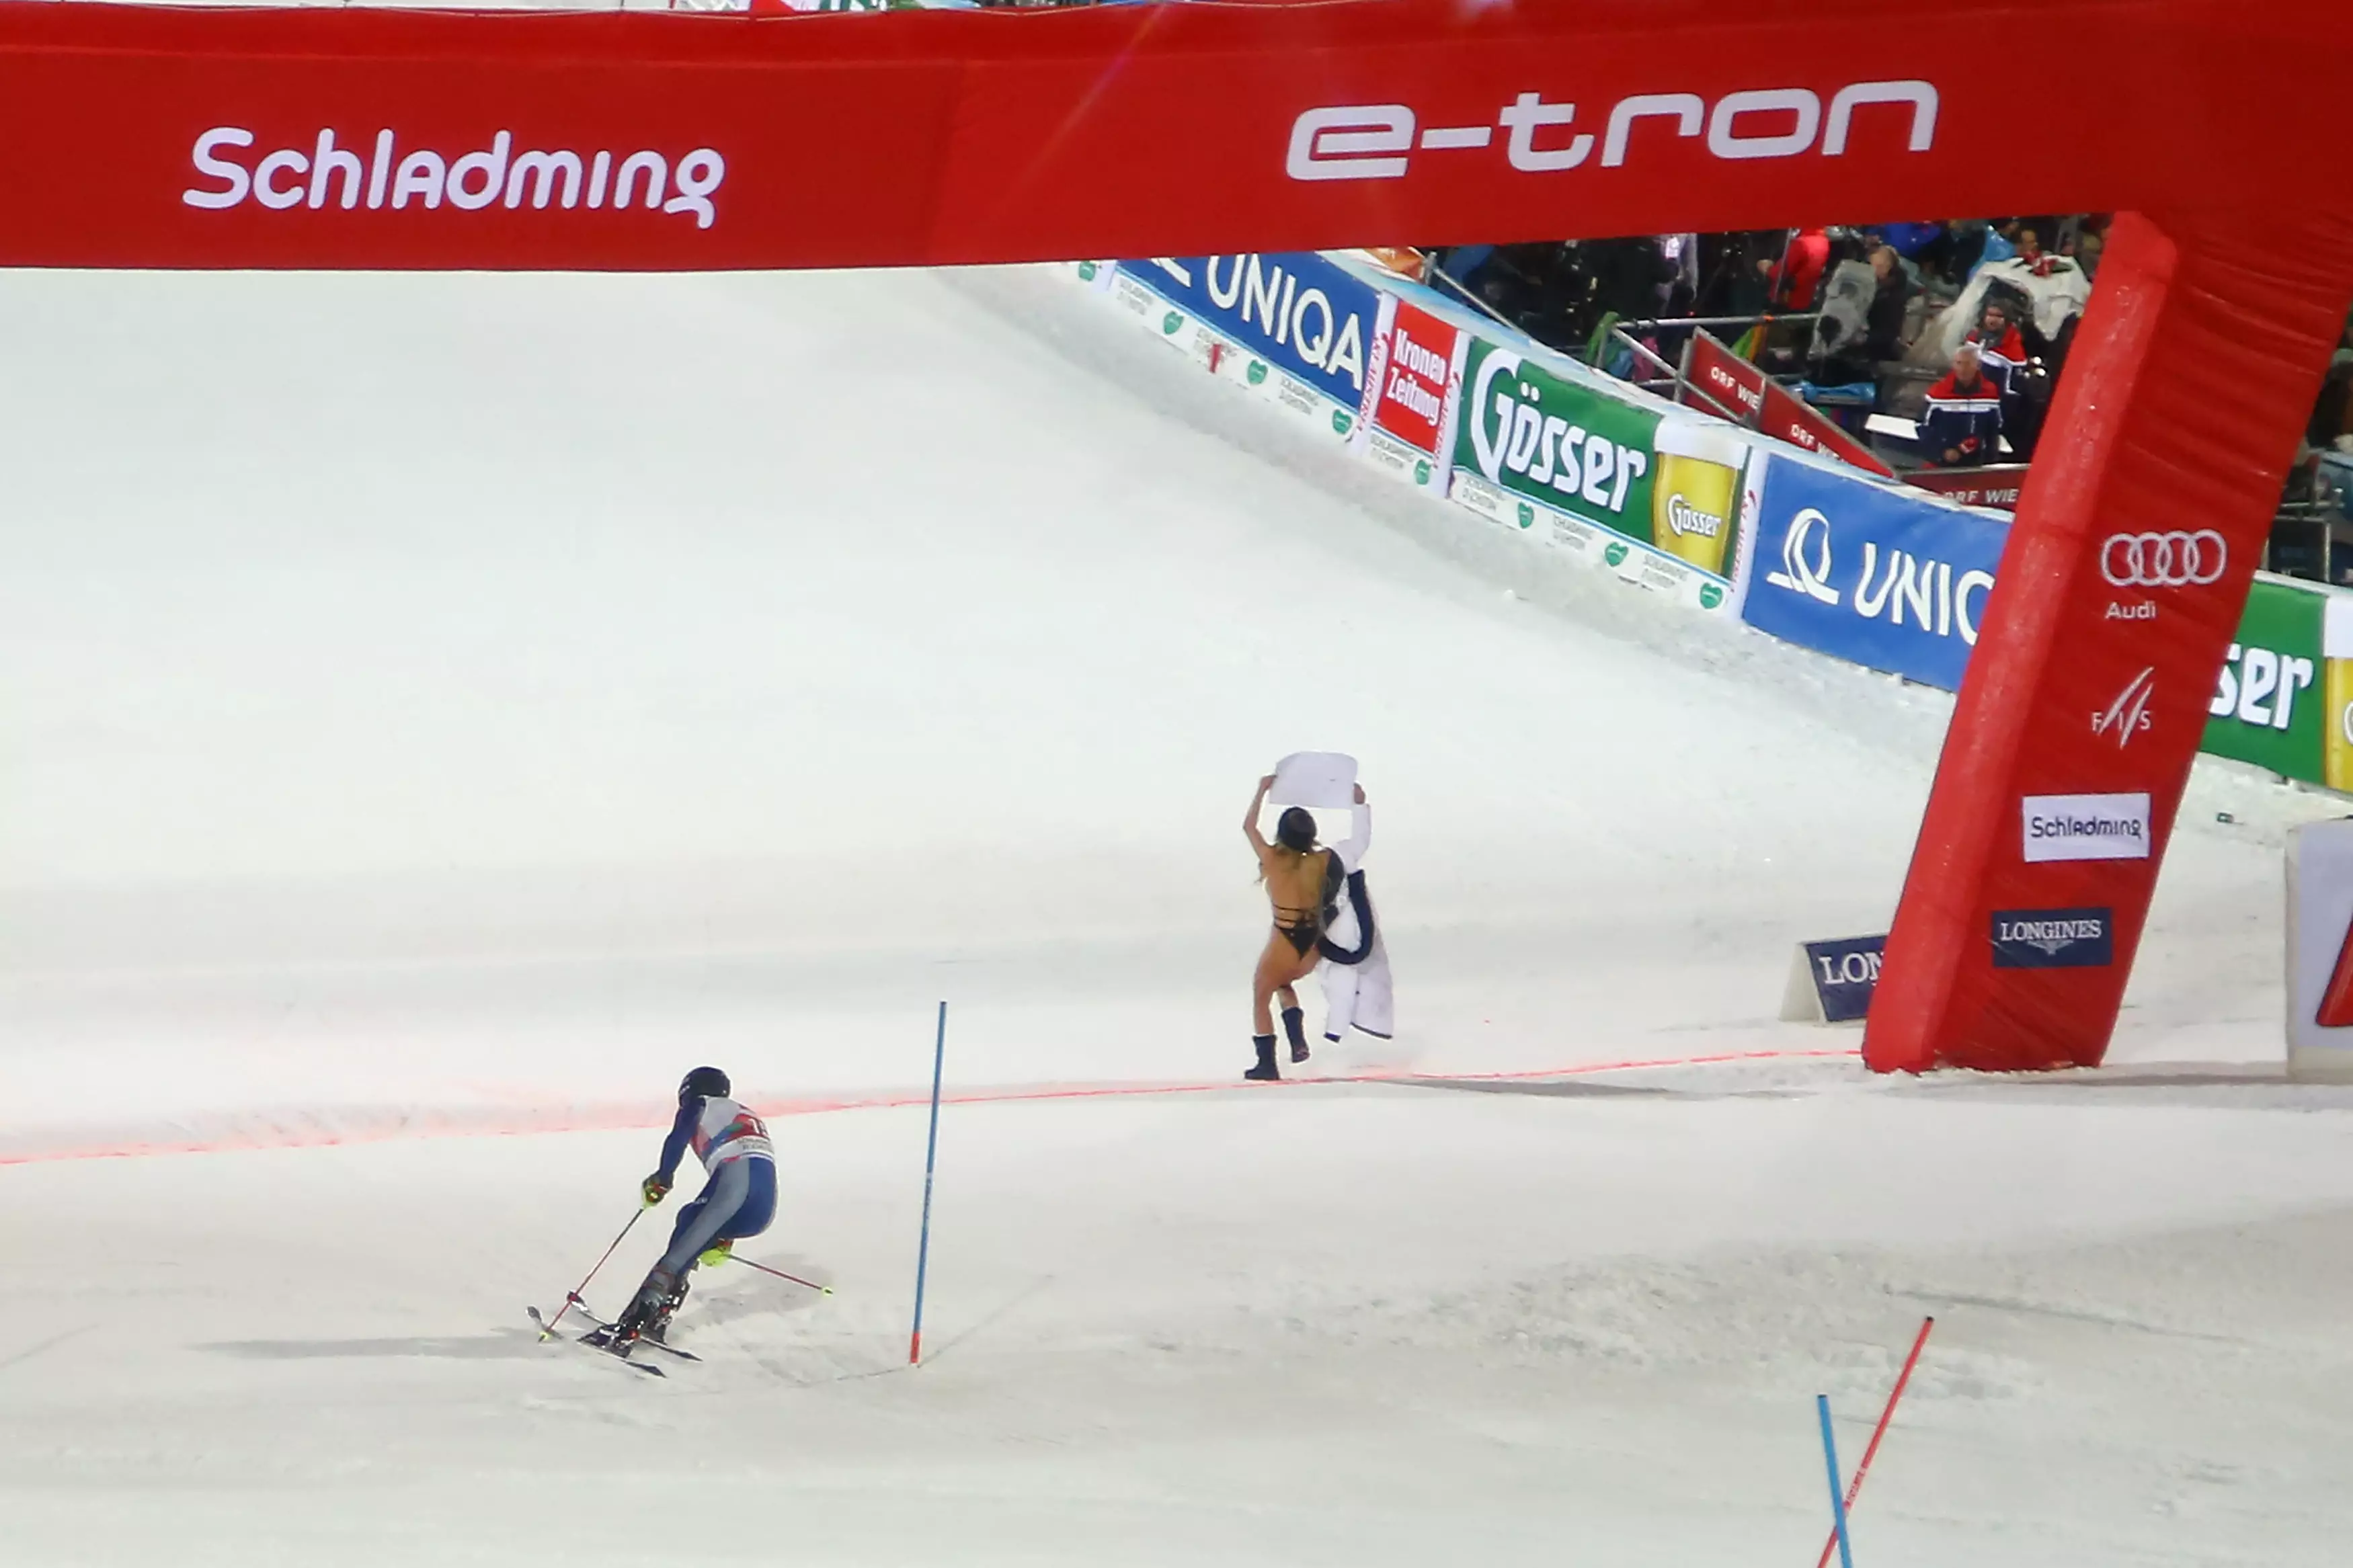 Kinsey Wolanski stopped the timer prematurely for skier Alex Vinatzer, causing some confusion.